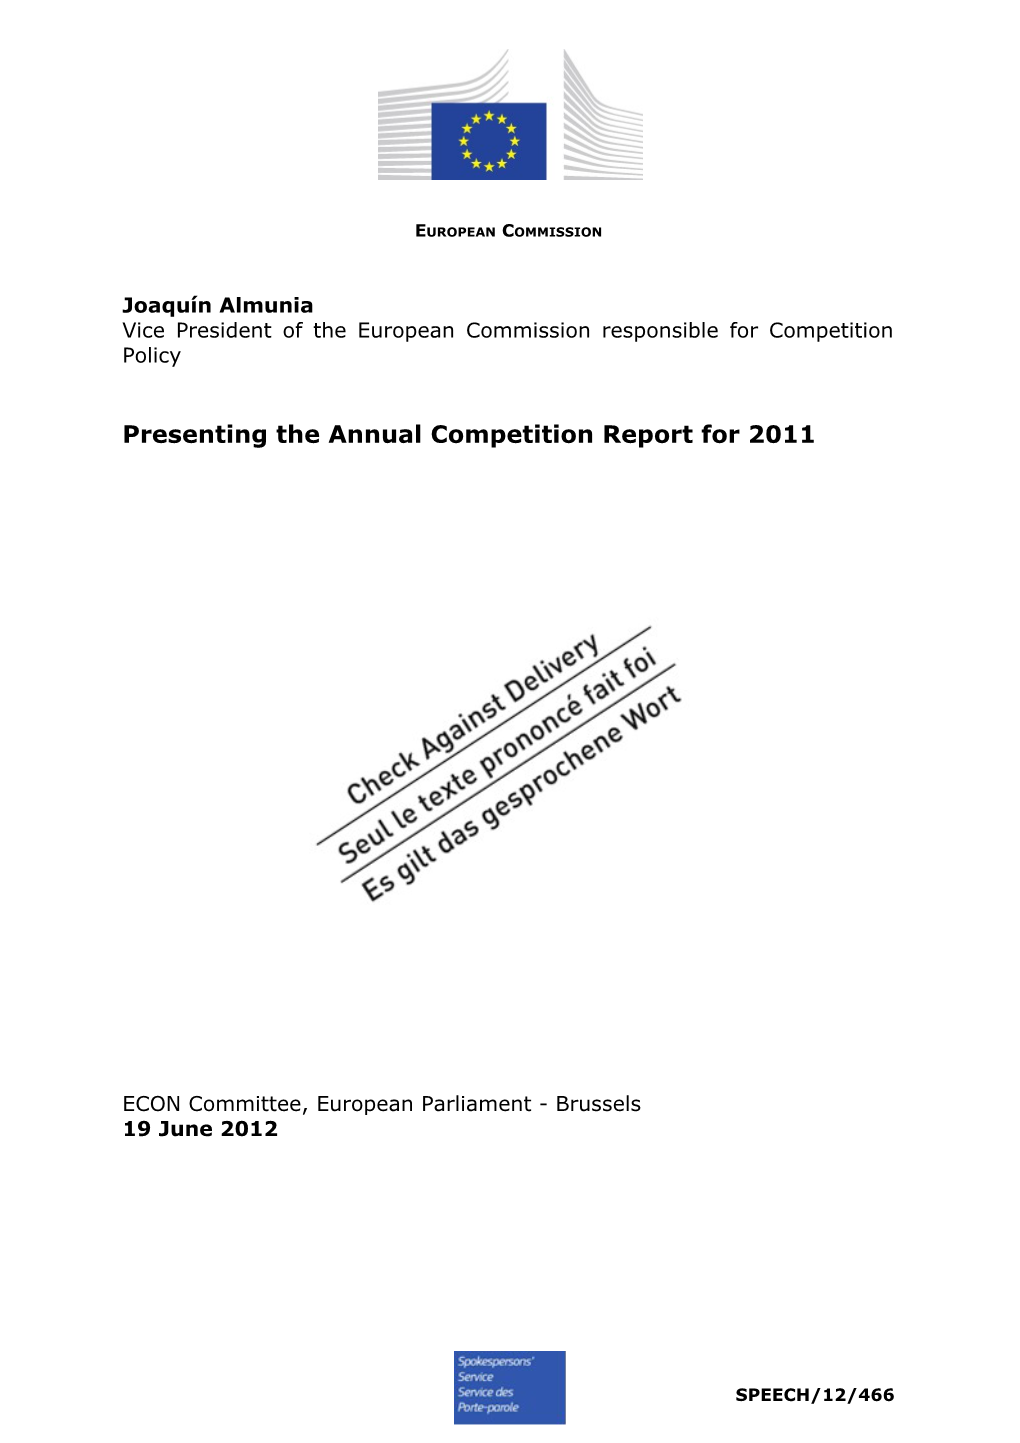 Presenting the Annual Competition Report for 2011